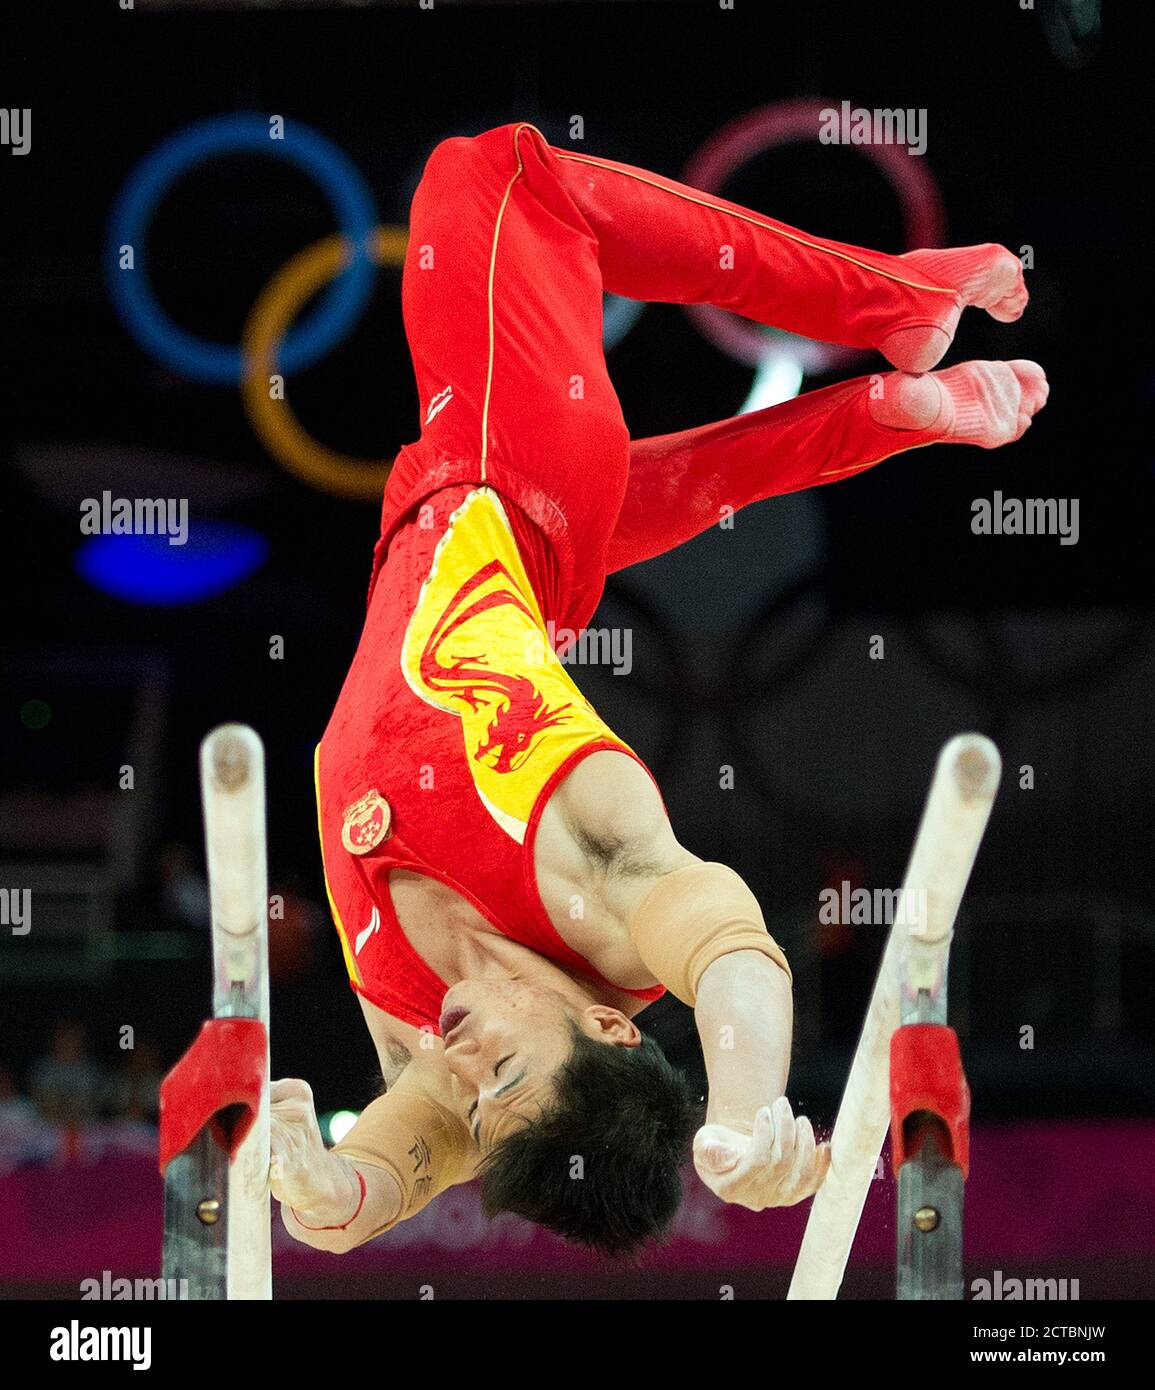 CHENGLONG ZHANG MÄNNER PARALLEL BARS FINALE DER OLYMPISCHEN SPIELE 2012 IN LONDON NORTH GREENWICH ARENA COPYRIGHT PICTURE : MARK PAIN 7/8/2012. 07774 842005 FOTO Stockfoto